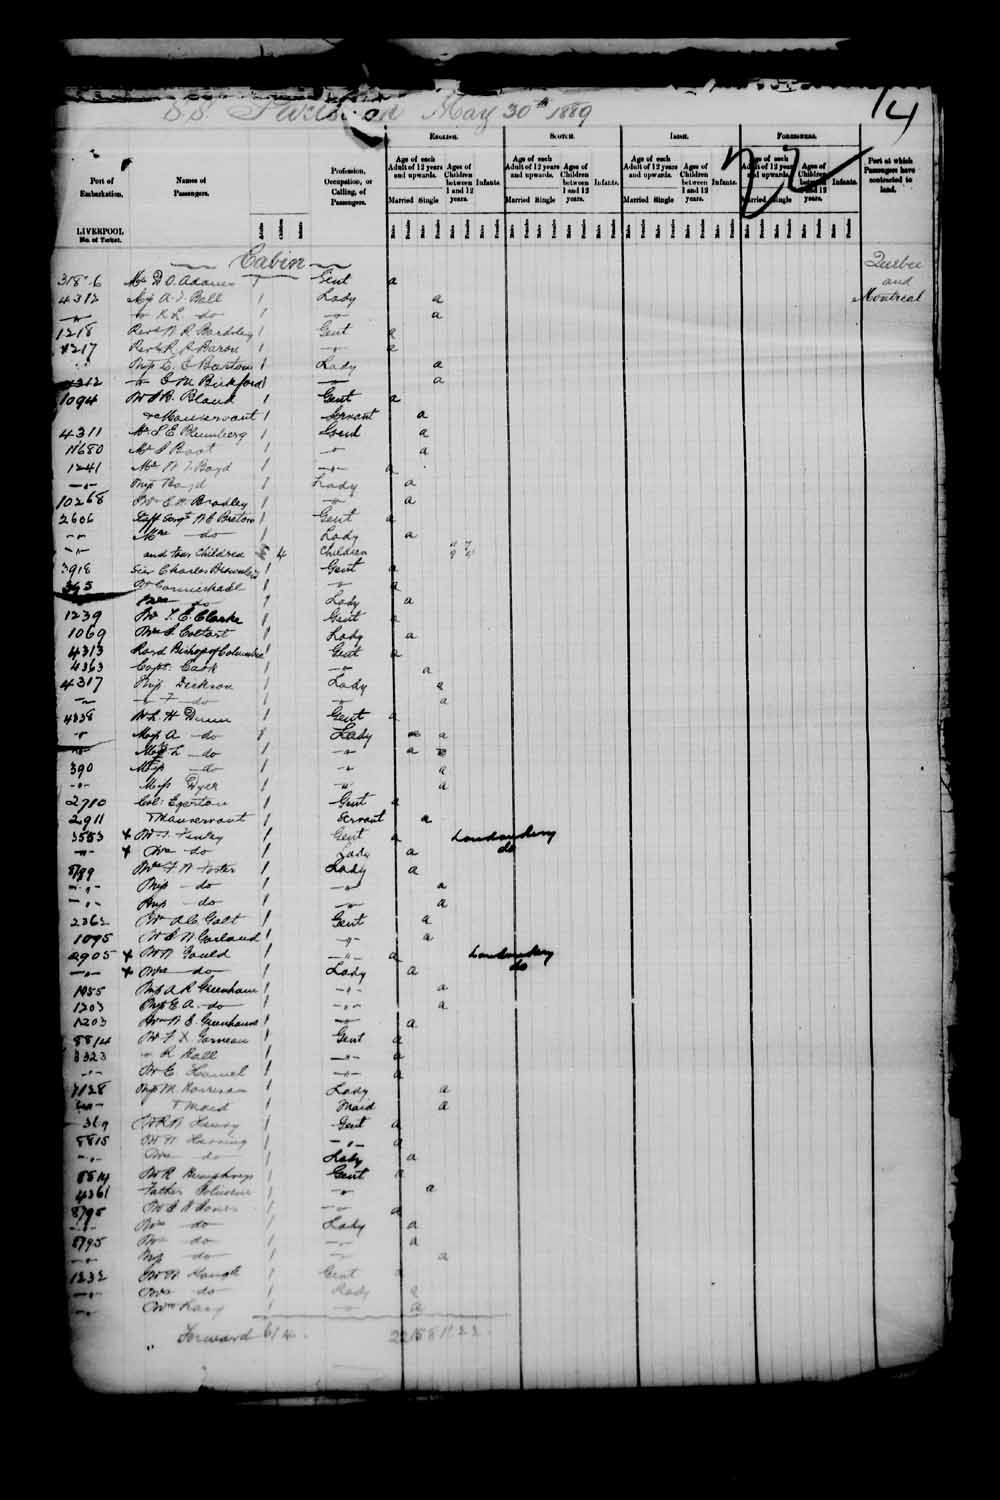 Digitized page of Passenger Lists for Image No.: e003549667